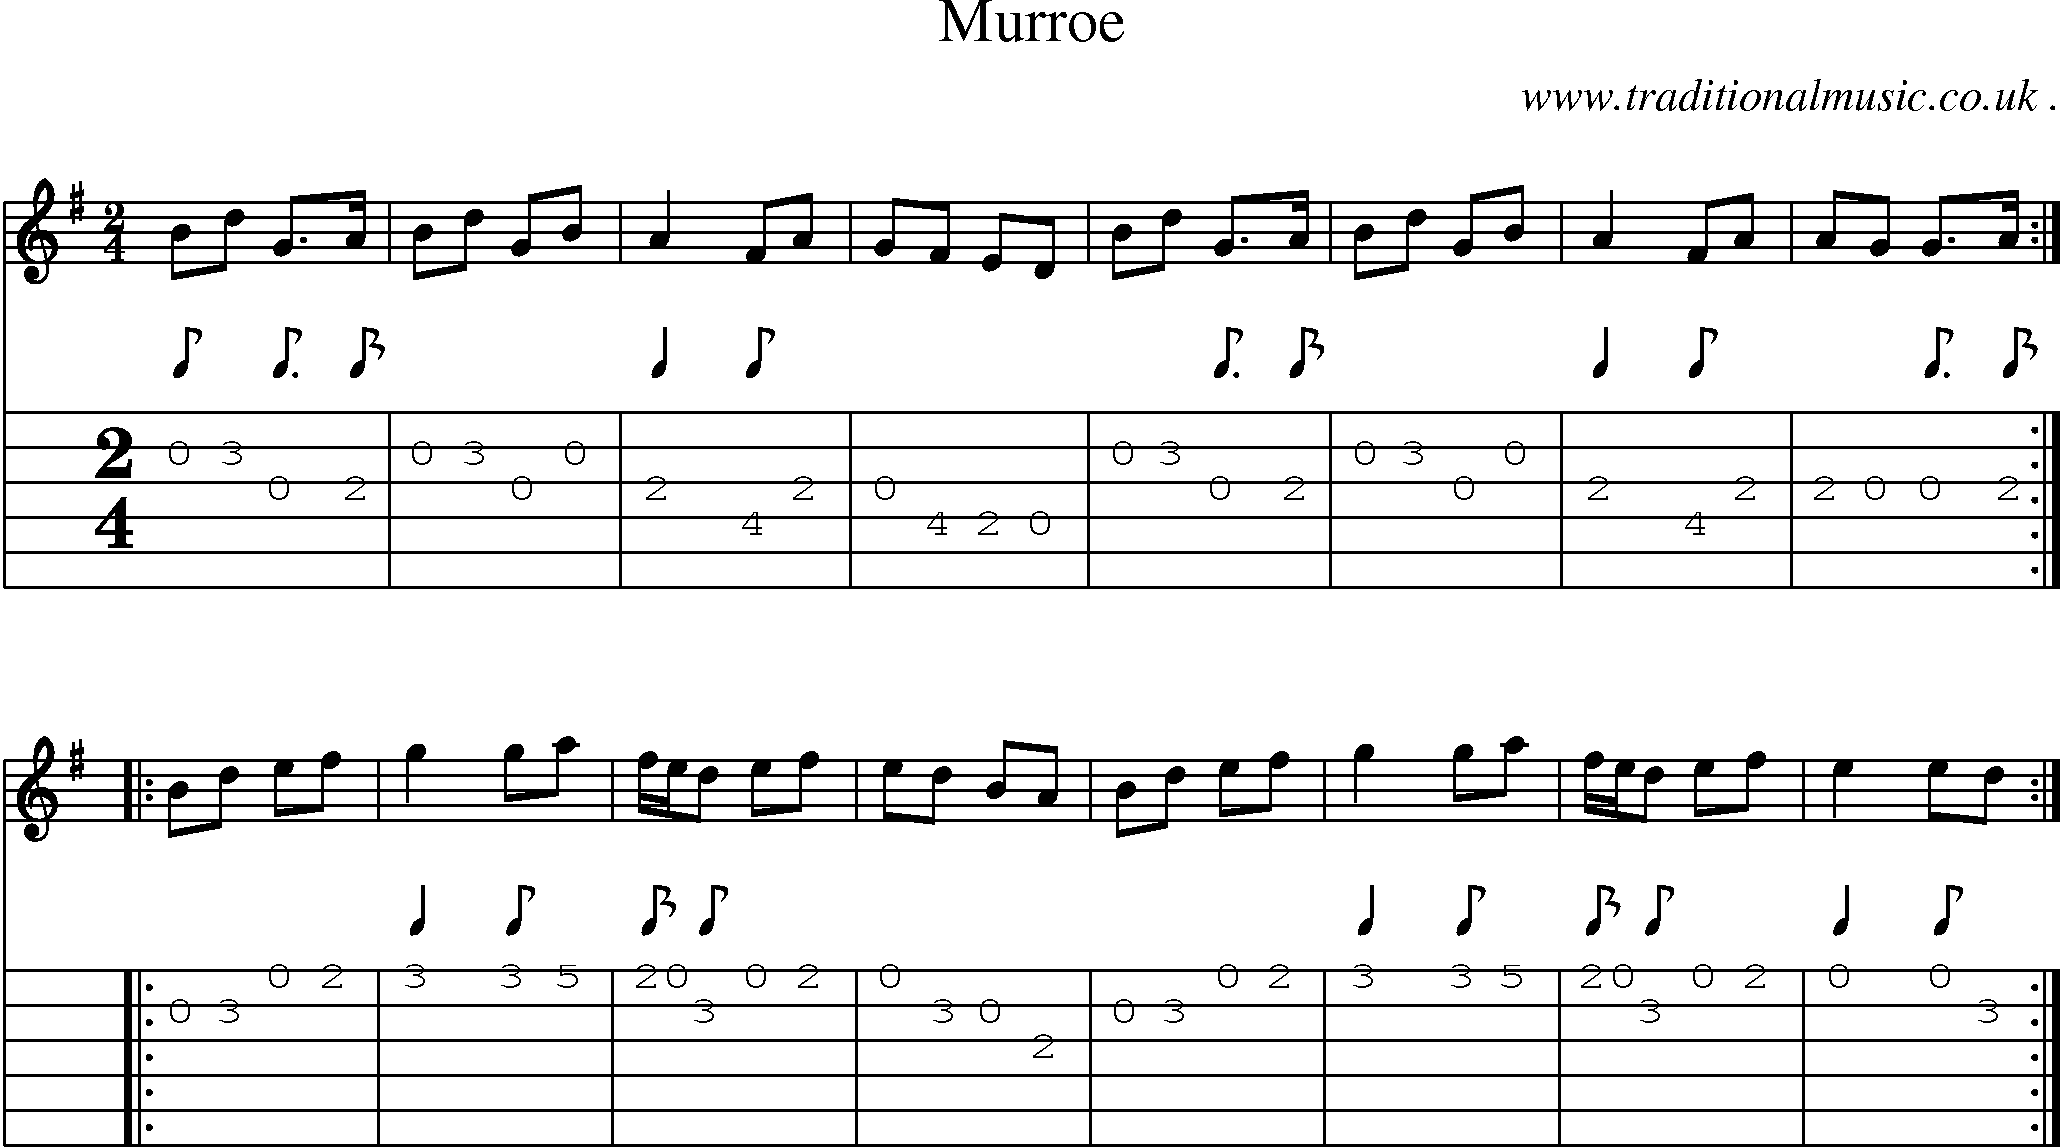 Sheet-Music and Guitar Tabs for Murroe